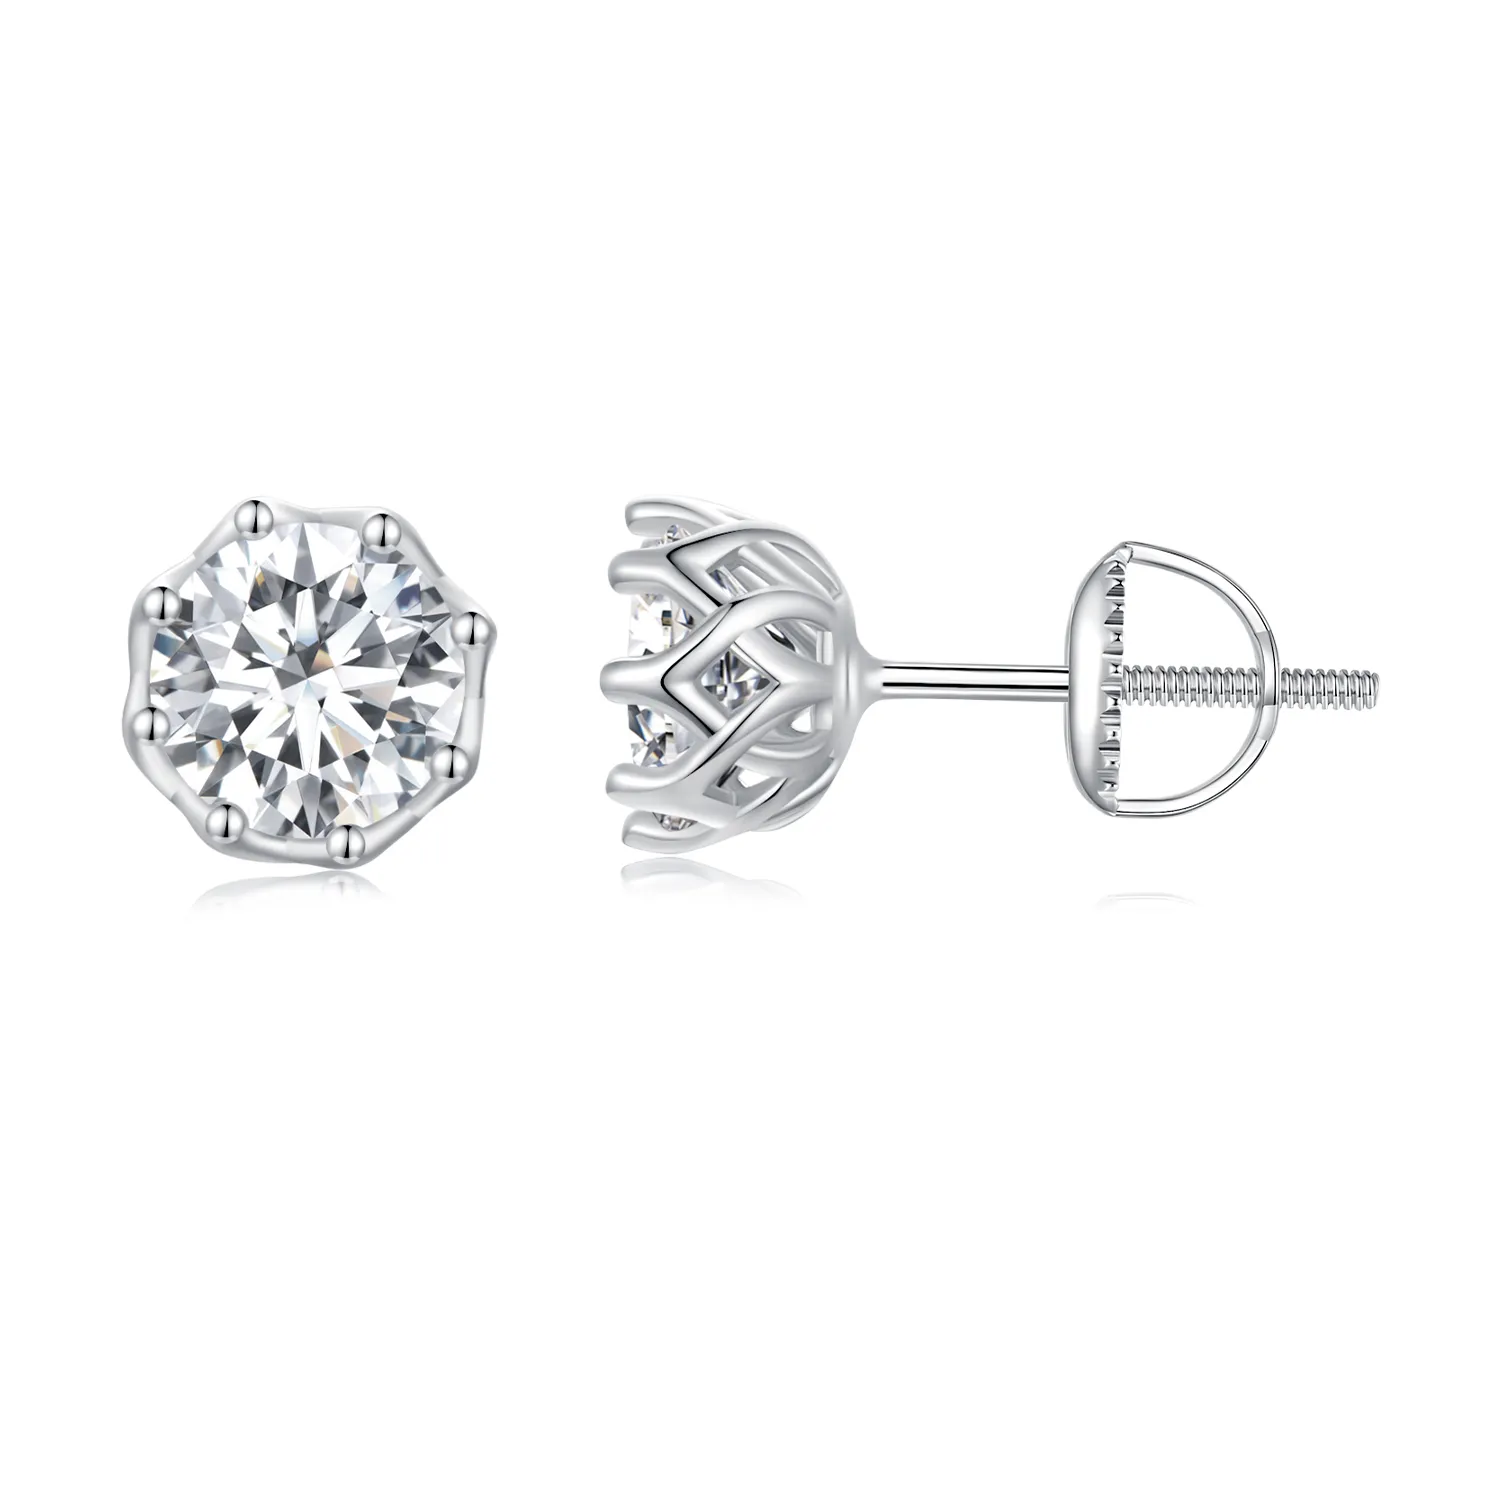 pandora style exquisite moissanite studs earrings mse016 l